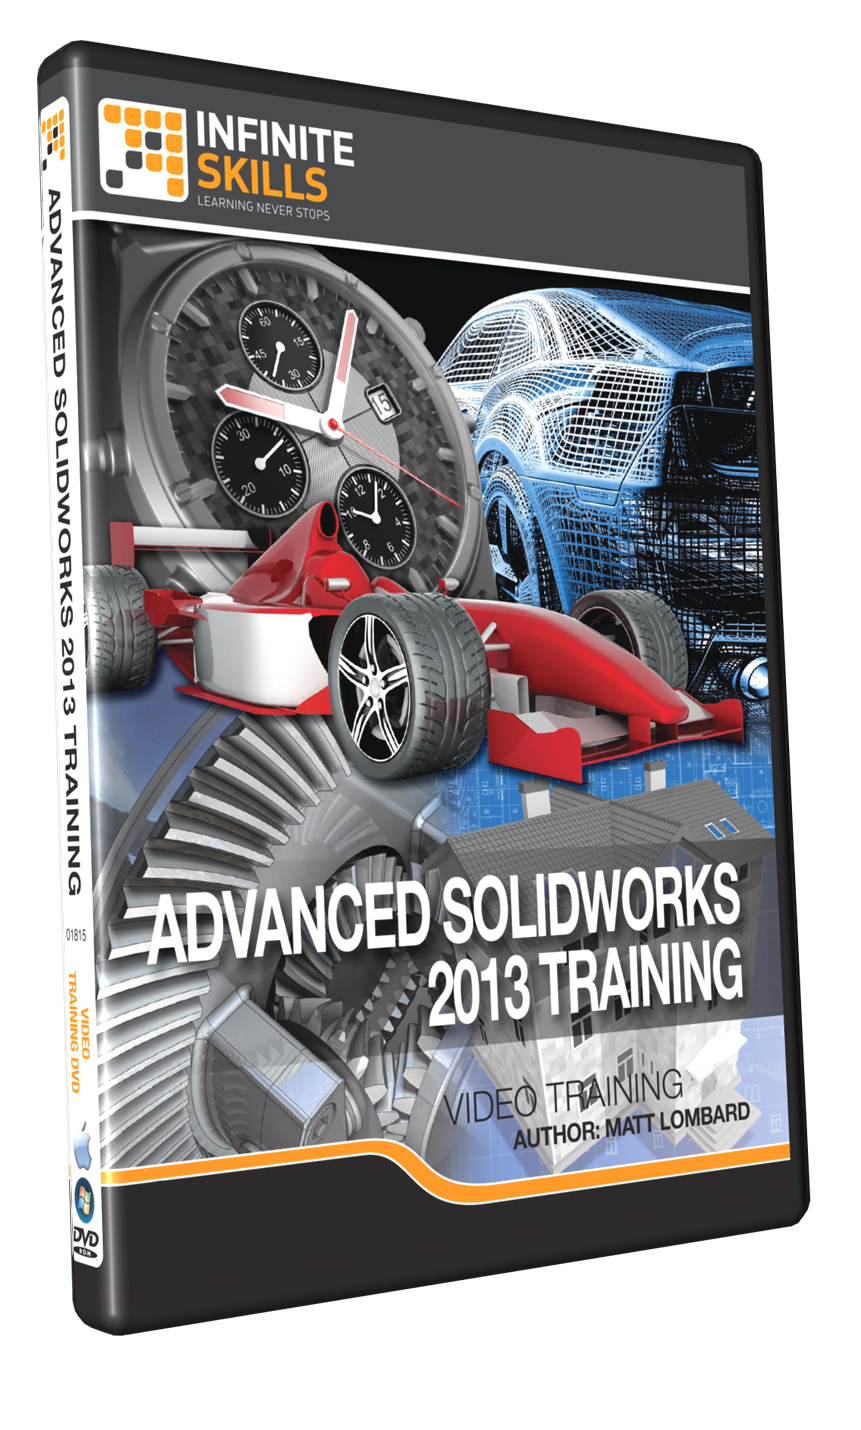 advanced solidworks 2013 training video free download